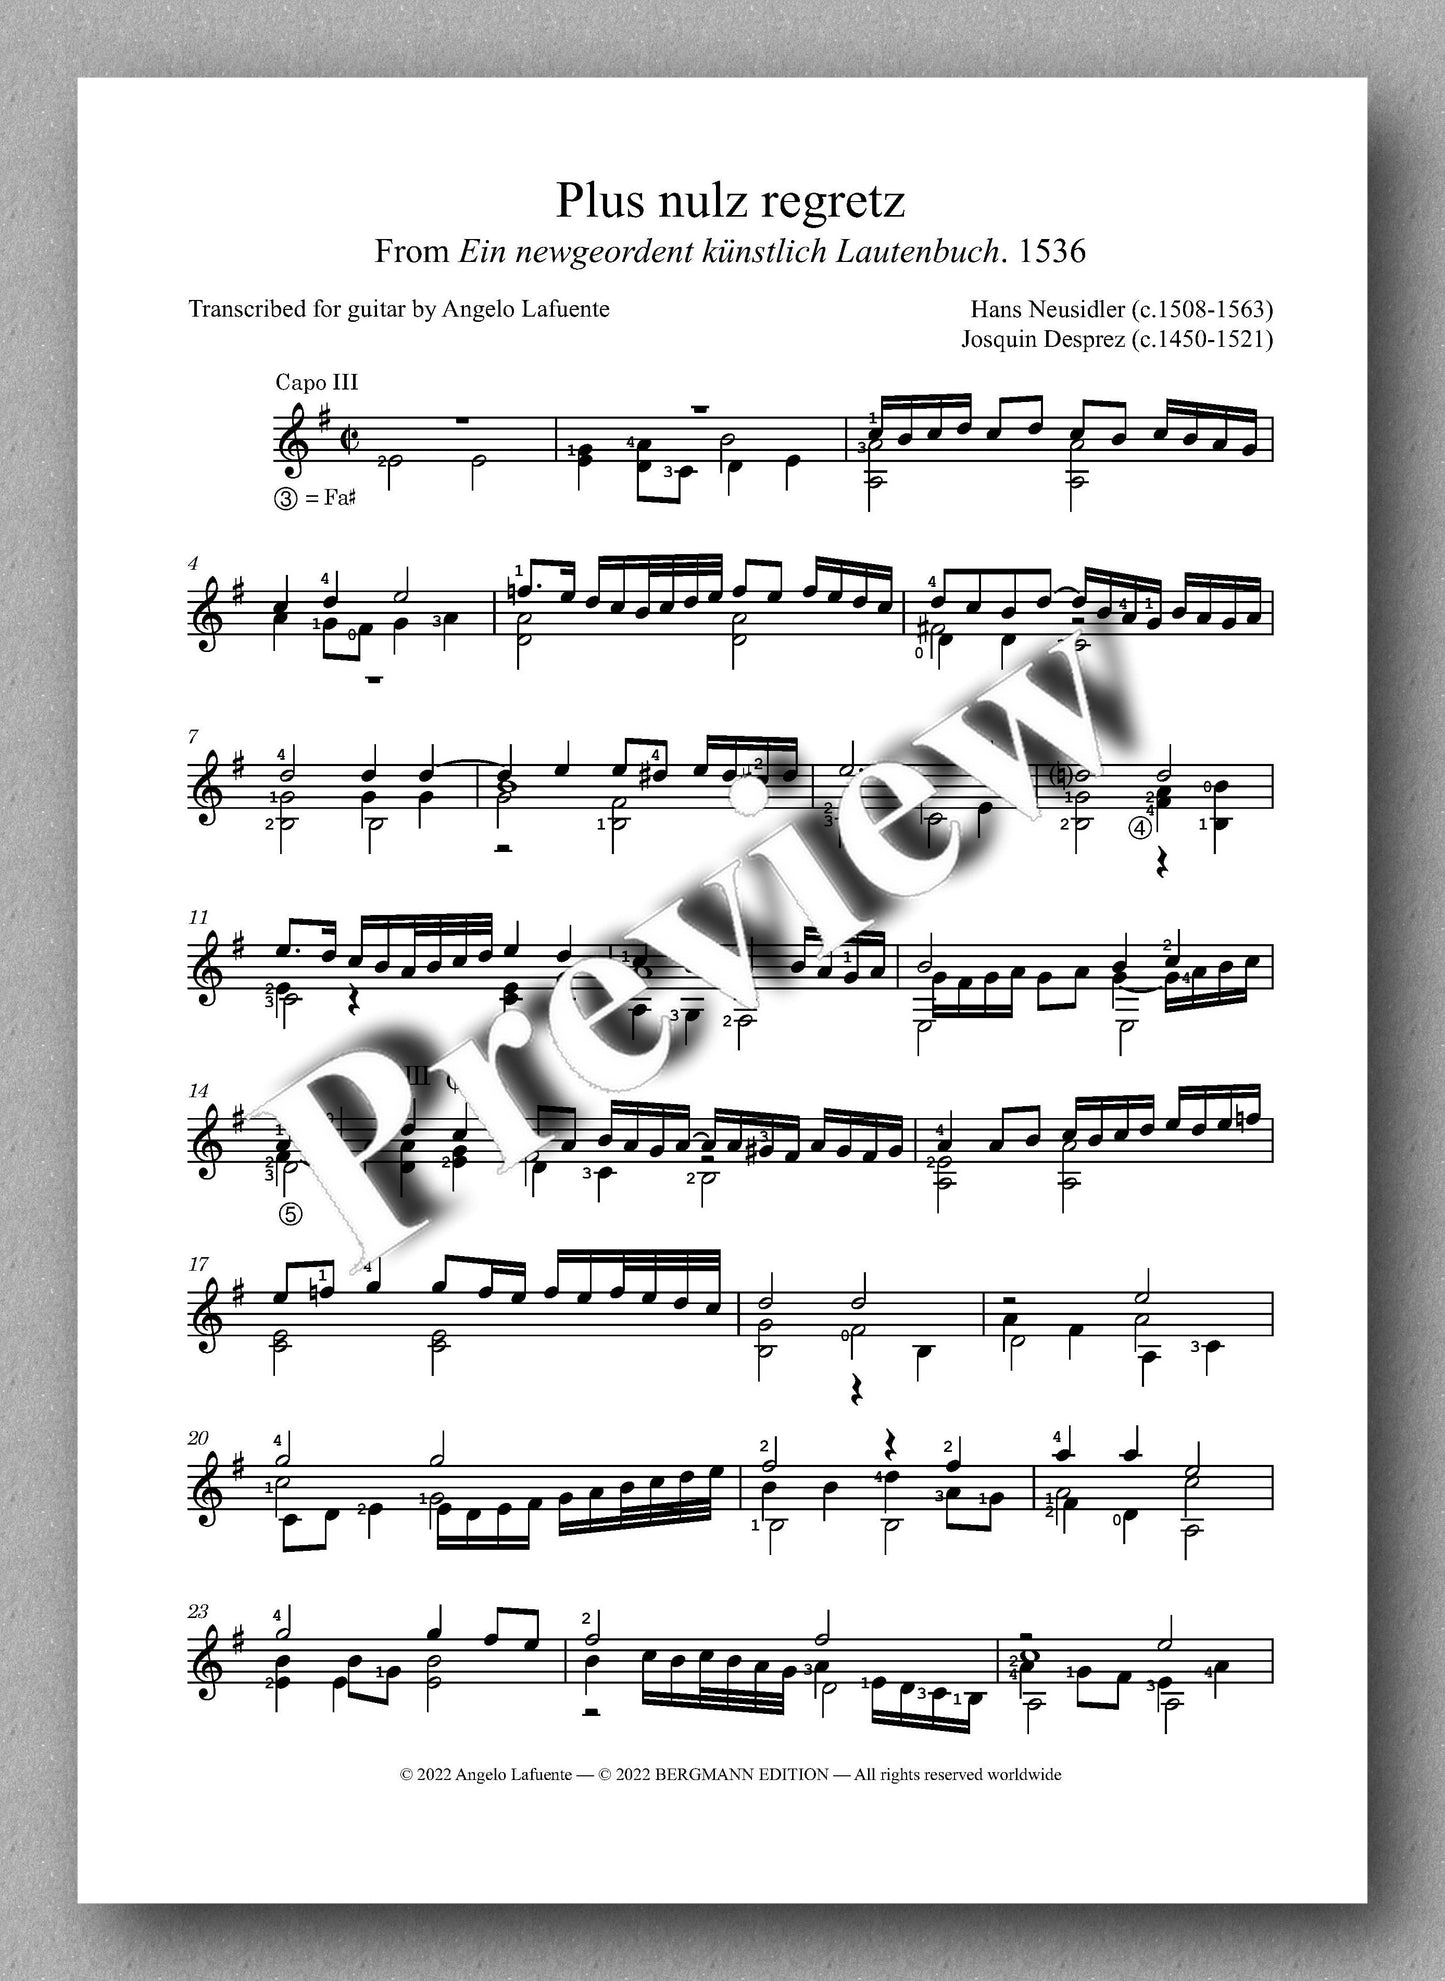 Hans Neusidler, Four Pieces  -  preview of the music score 4